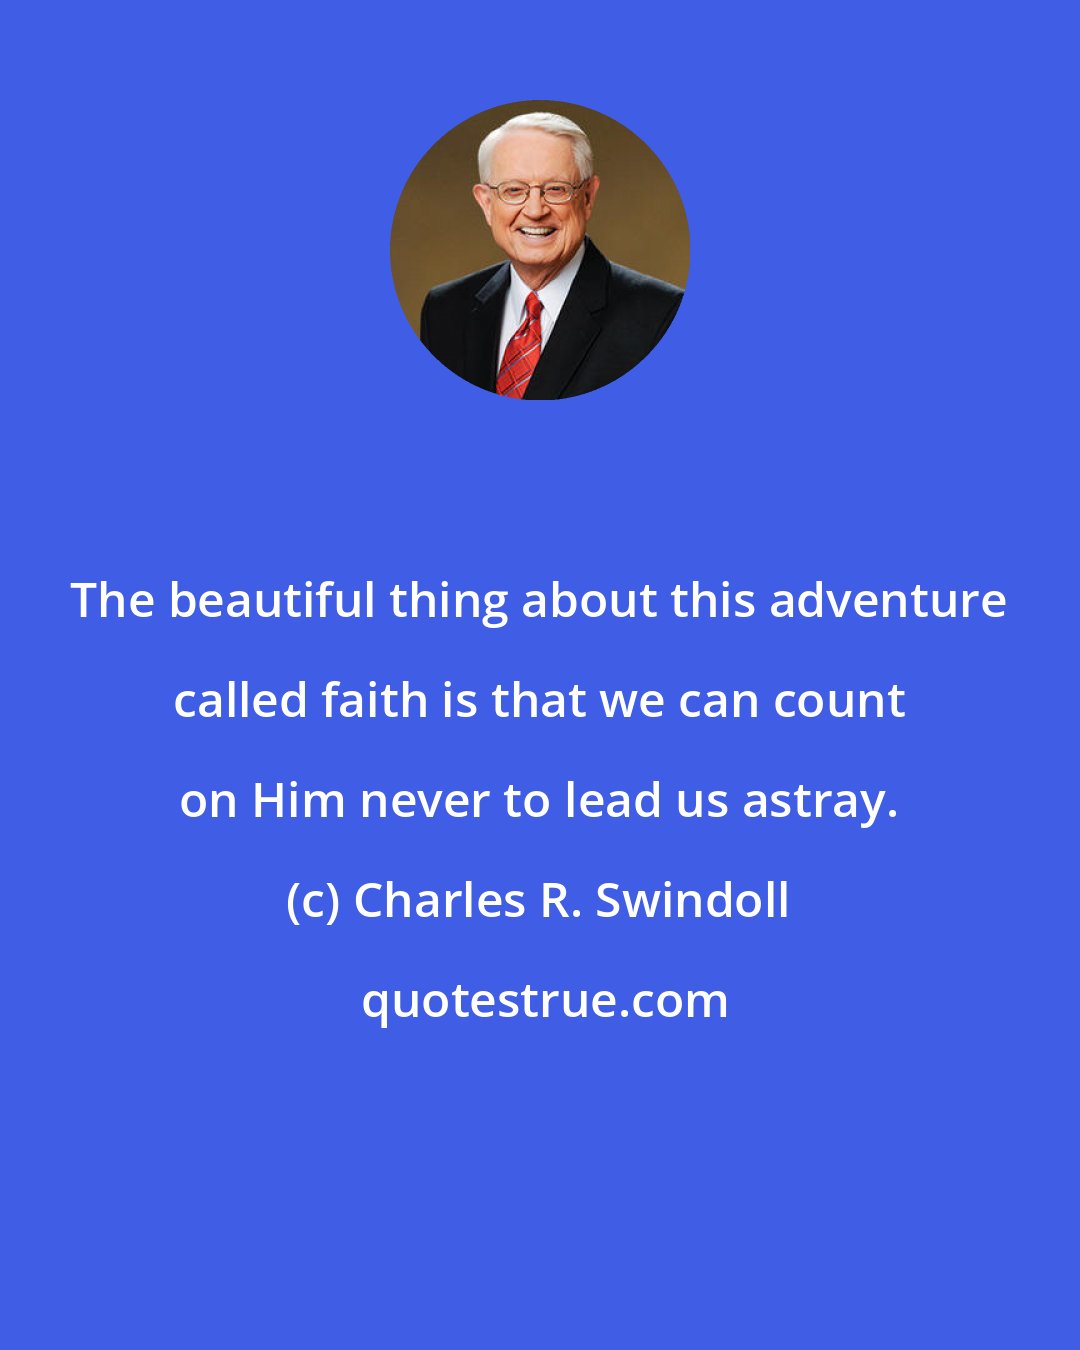 Charles R. Swindoll: The beautiful thing about this adventure called faith is that we can count on Him never to lead us astray.